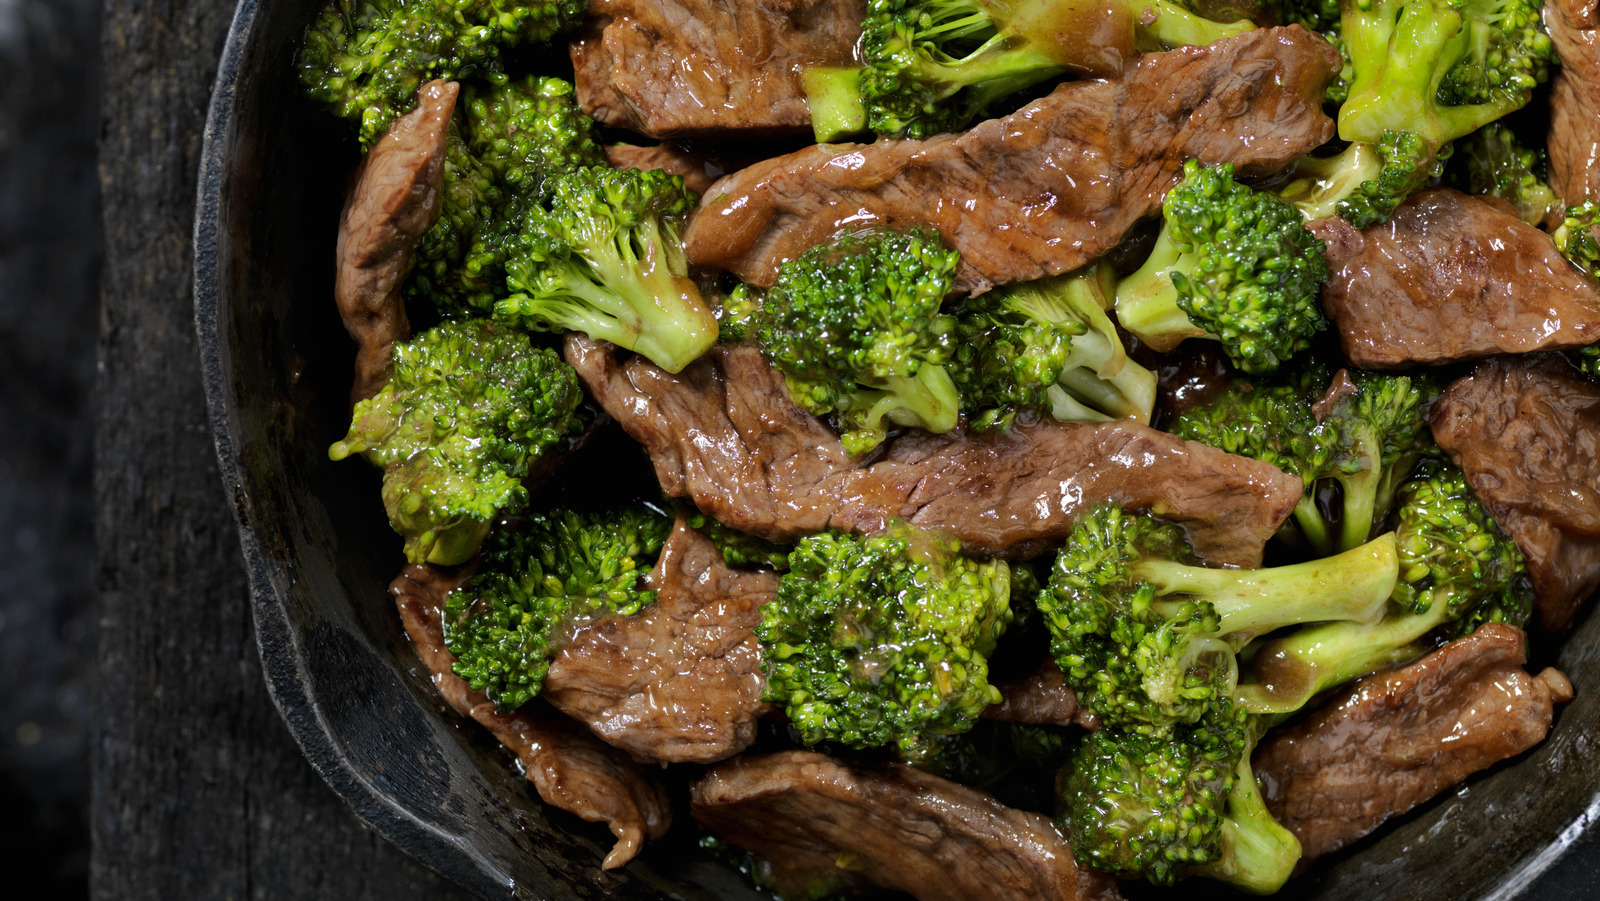 The Supposed History Of Beef And Broccoli Dates Back To The 1920s